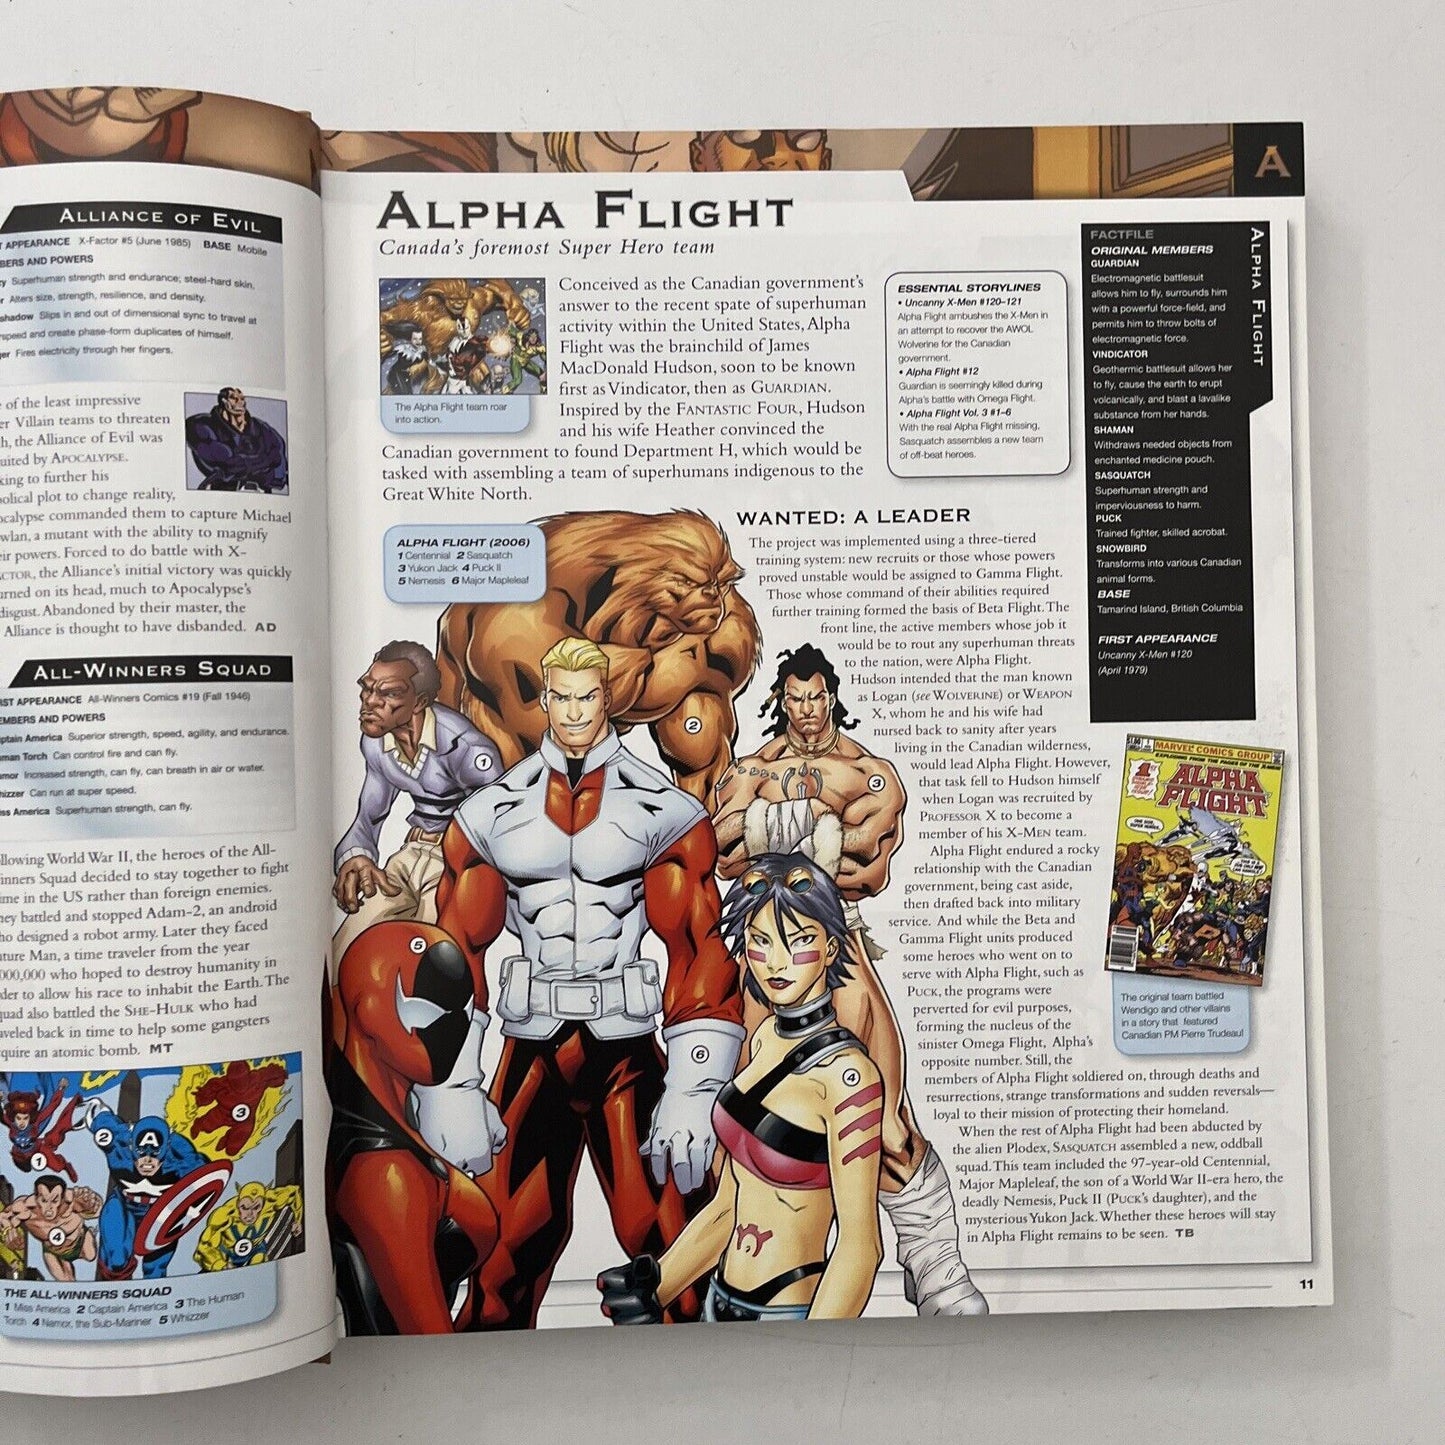 The Marvel Comics Encyclopedia: A Complete Guide to the Characters of the Marvel